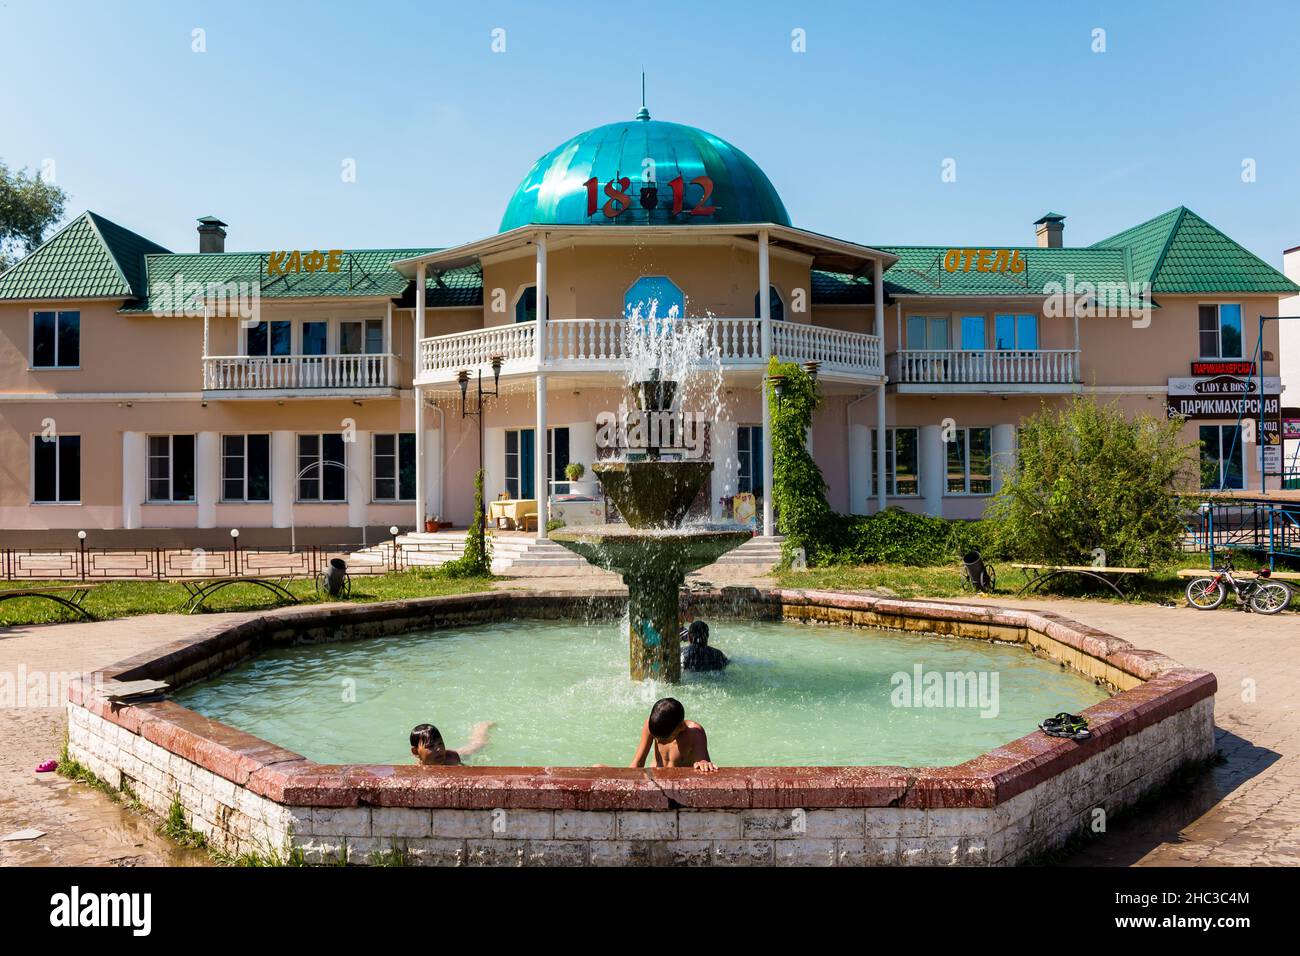 Fountain on the territory of the city square, children bathing in the fountain: Maloyaroslavets, Russia - June 2021 Stock Photo